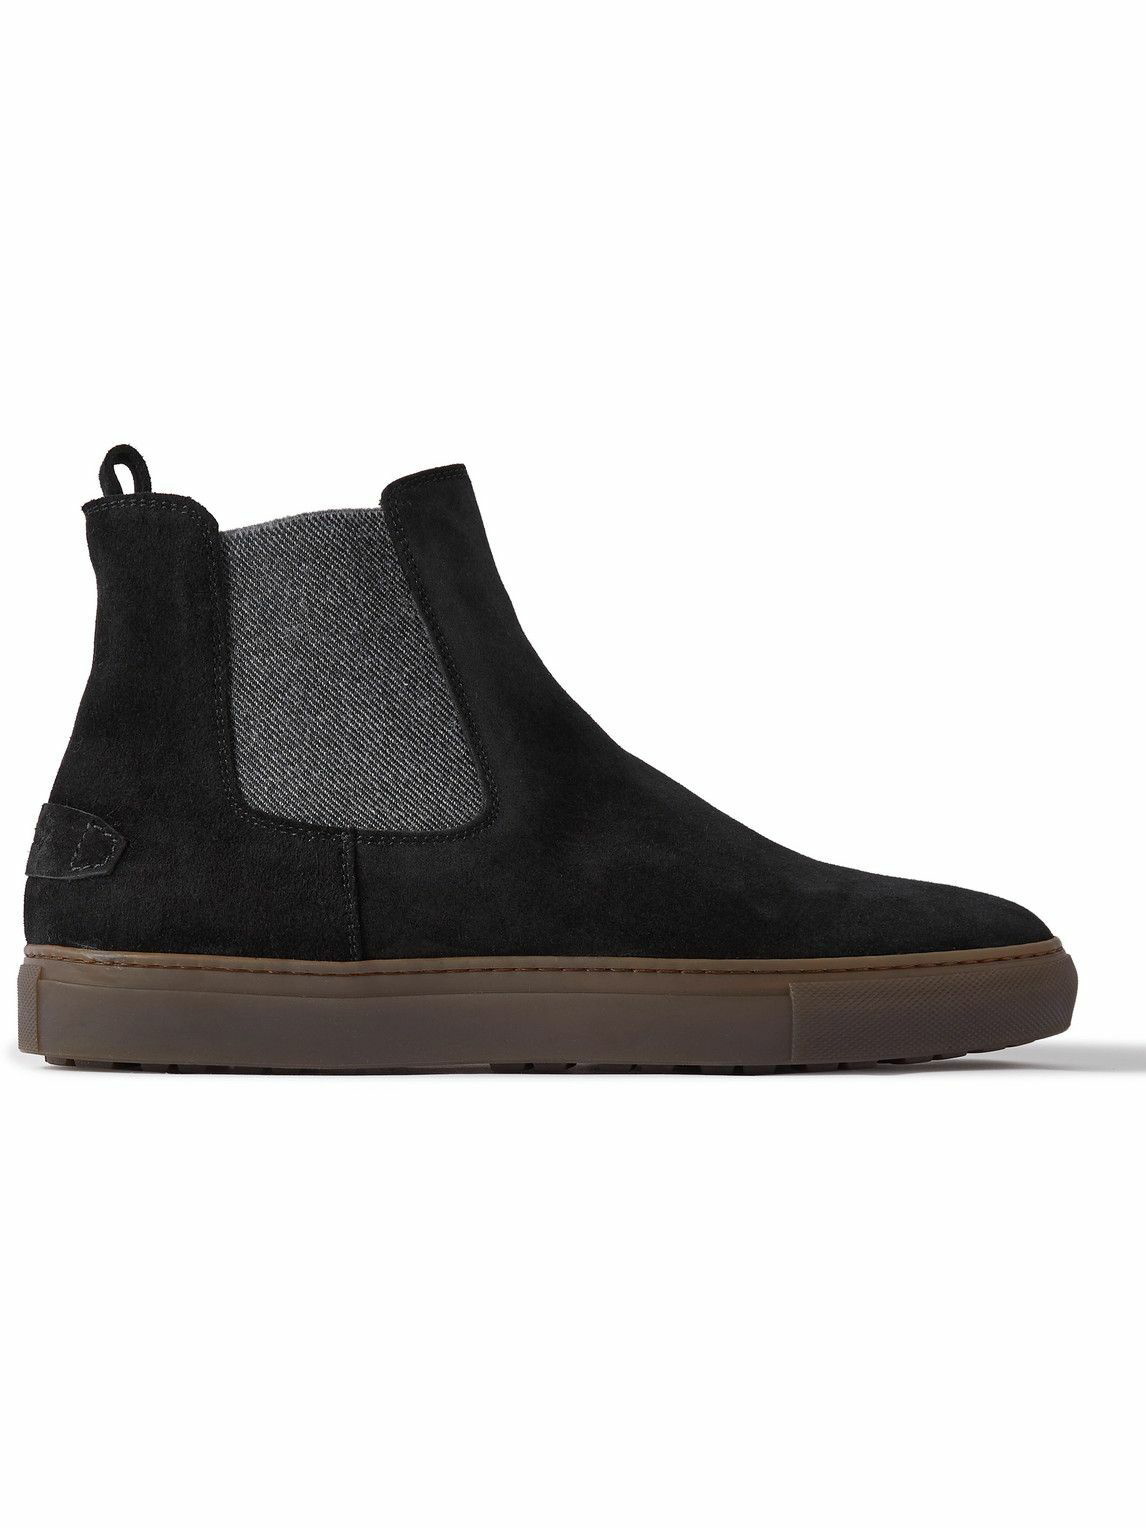 Brioni Brown Side Gusset Chelsea Boots Brioni